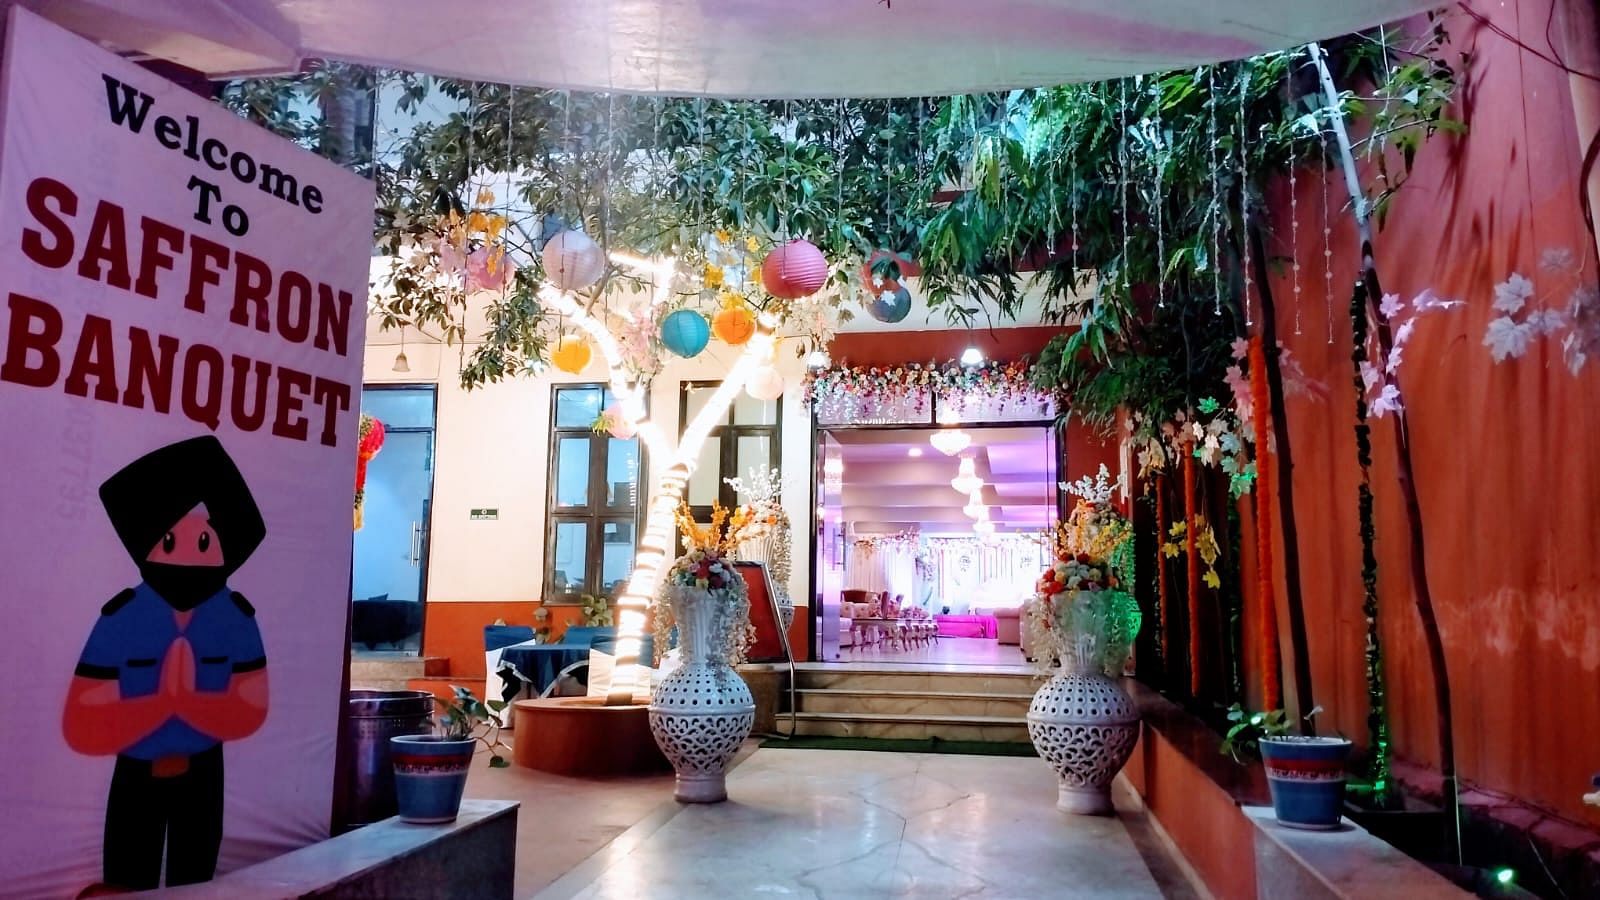 Saffron Banquet And Best Party Hall In Noida By City Stay in Sector 22, Noida